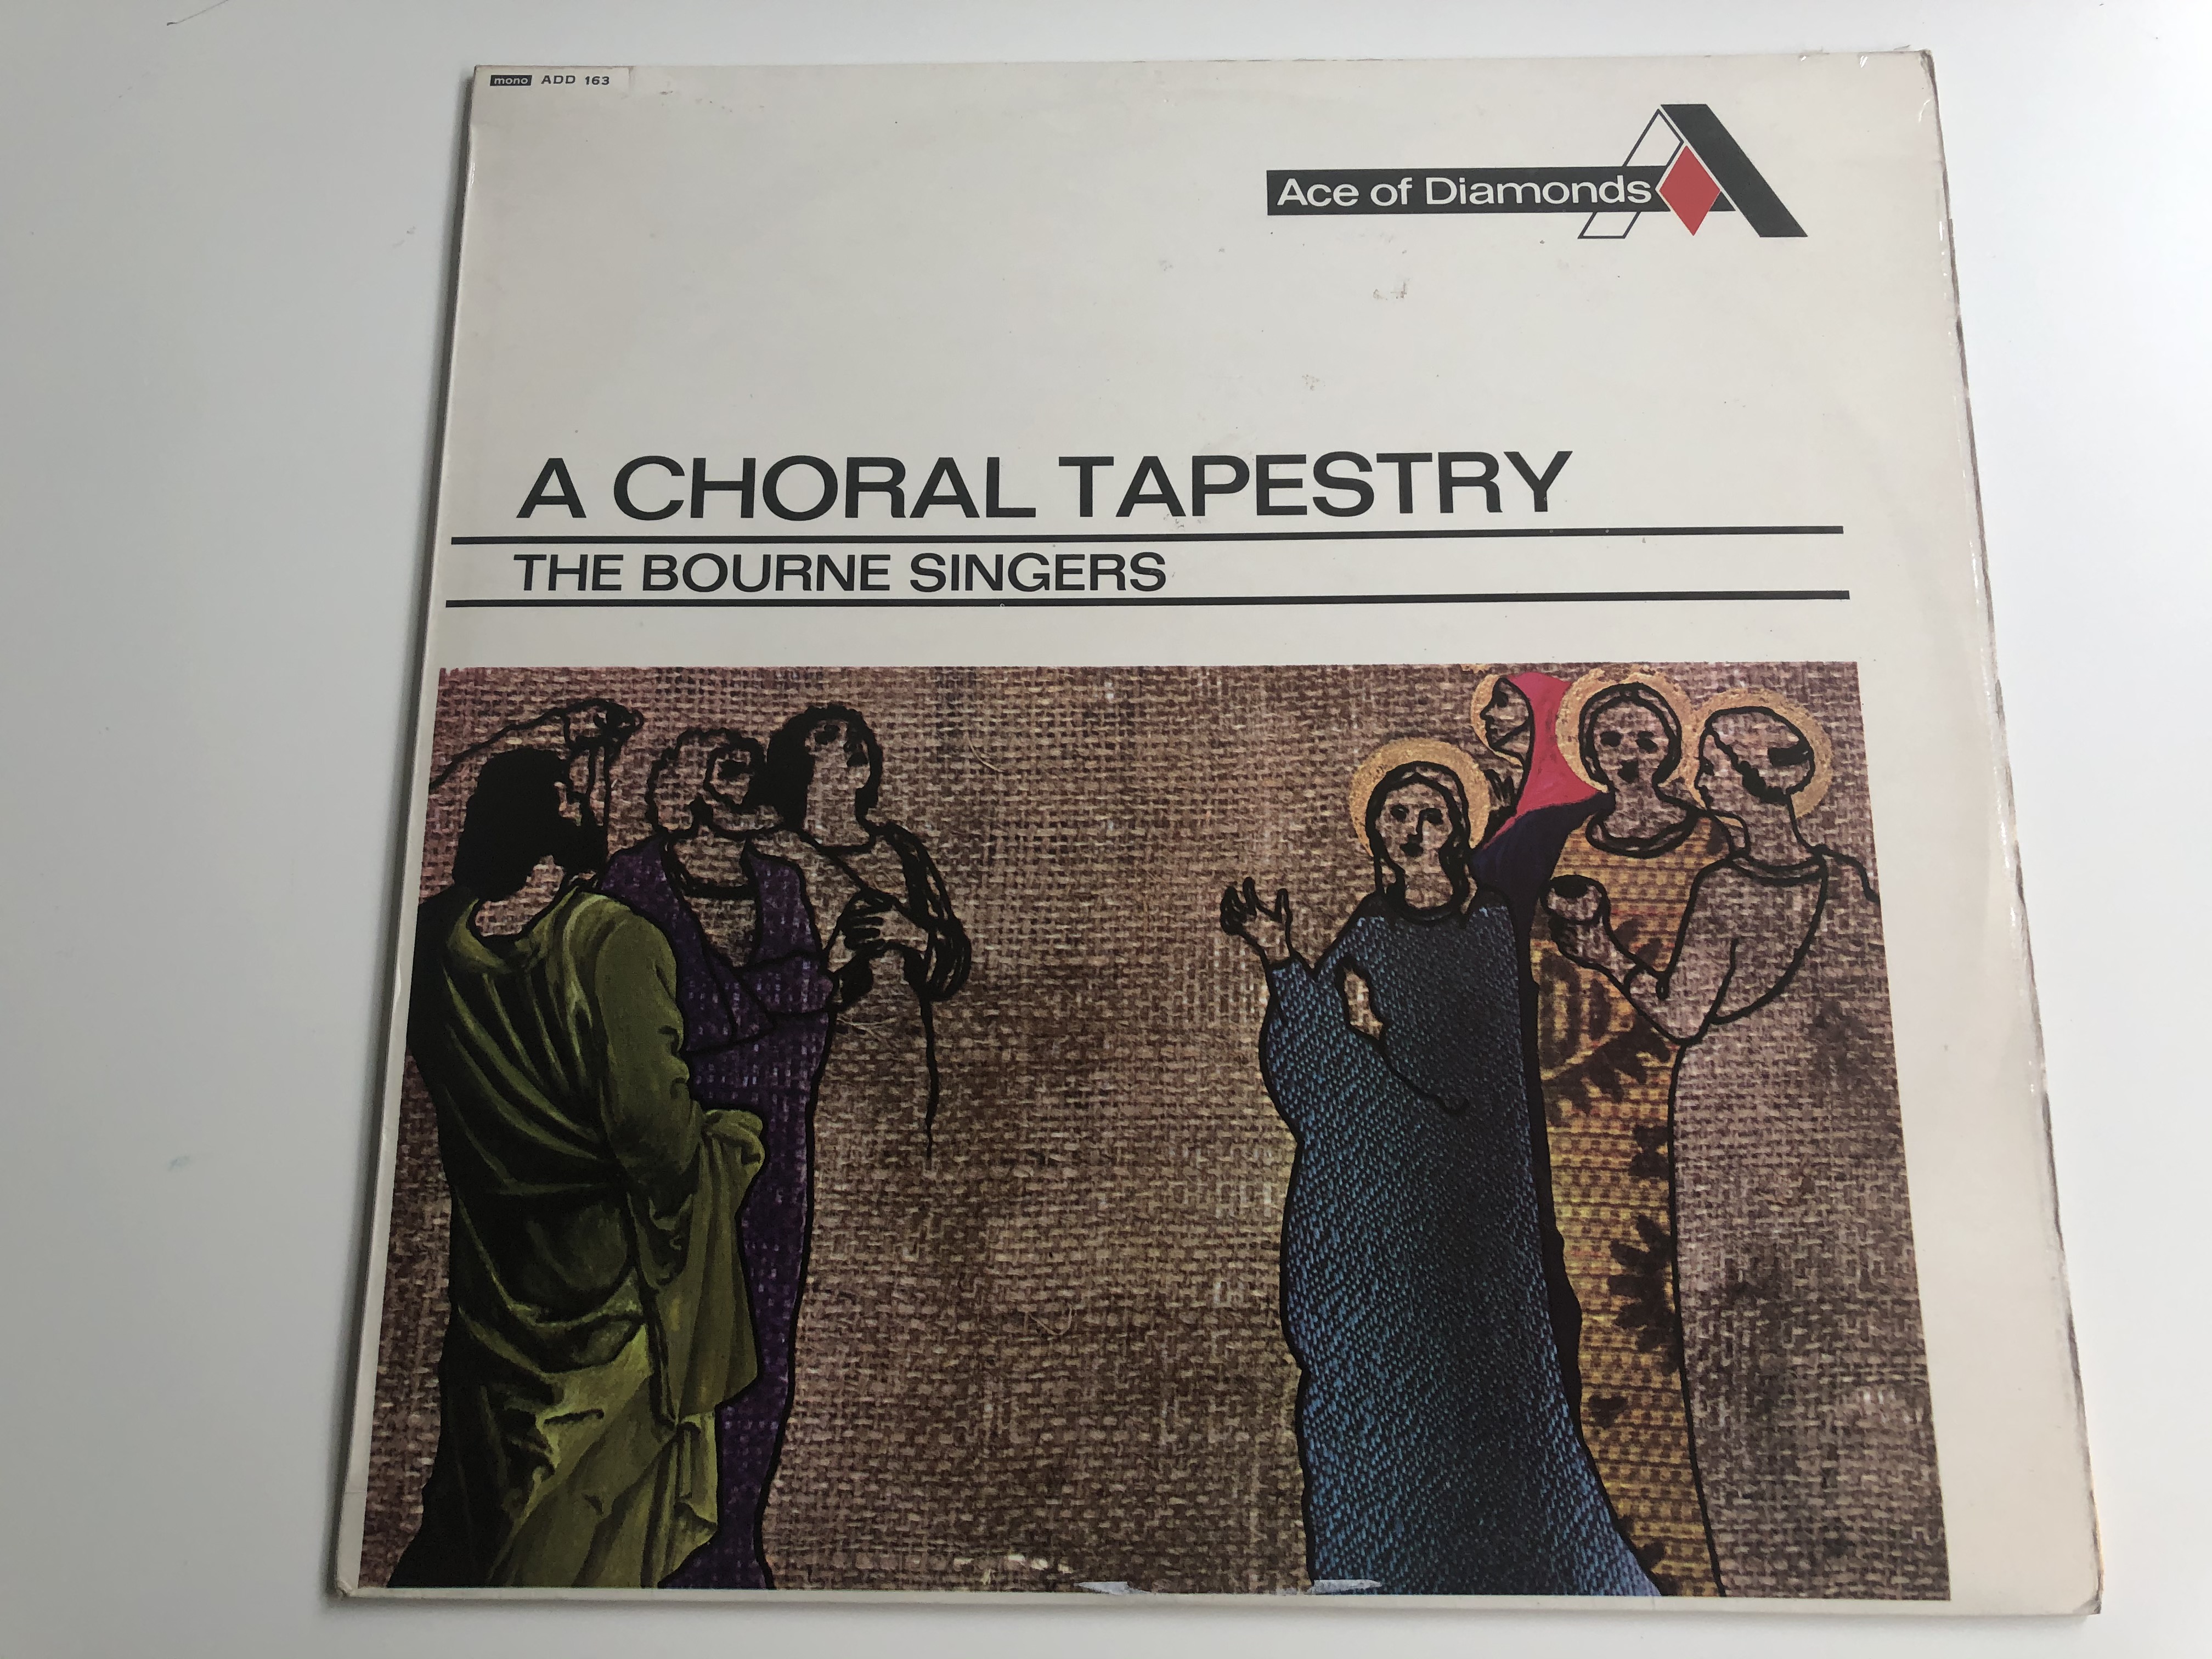 a-choral-tapestry-the-bourne-singers-ace-of-diamonds-lp-1967-mono-add-163-1-.jpg